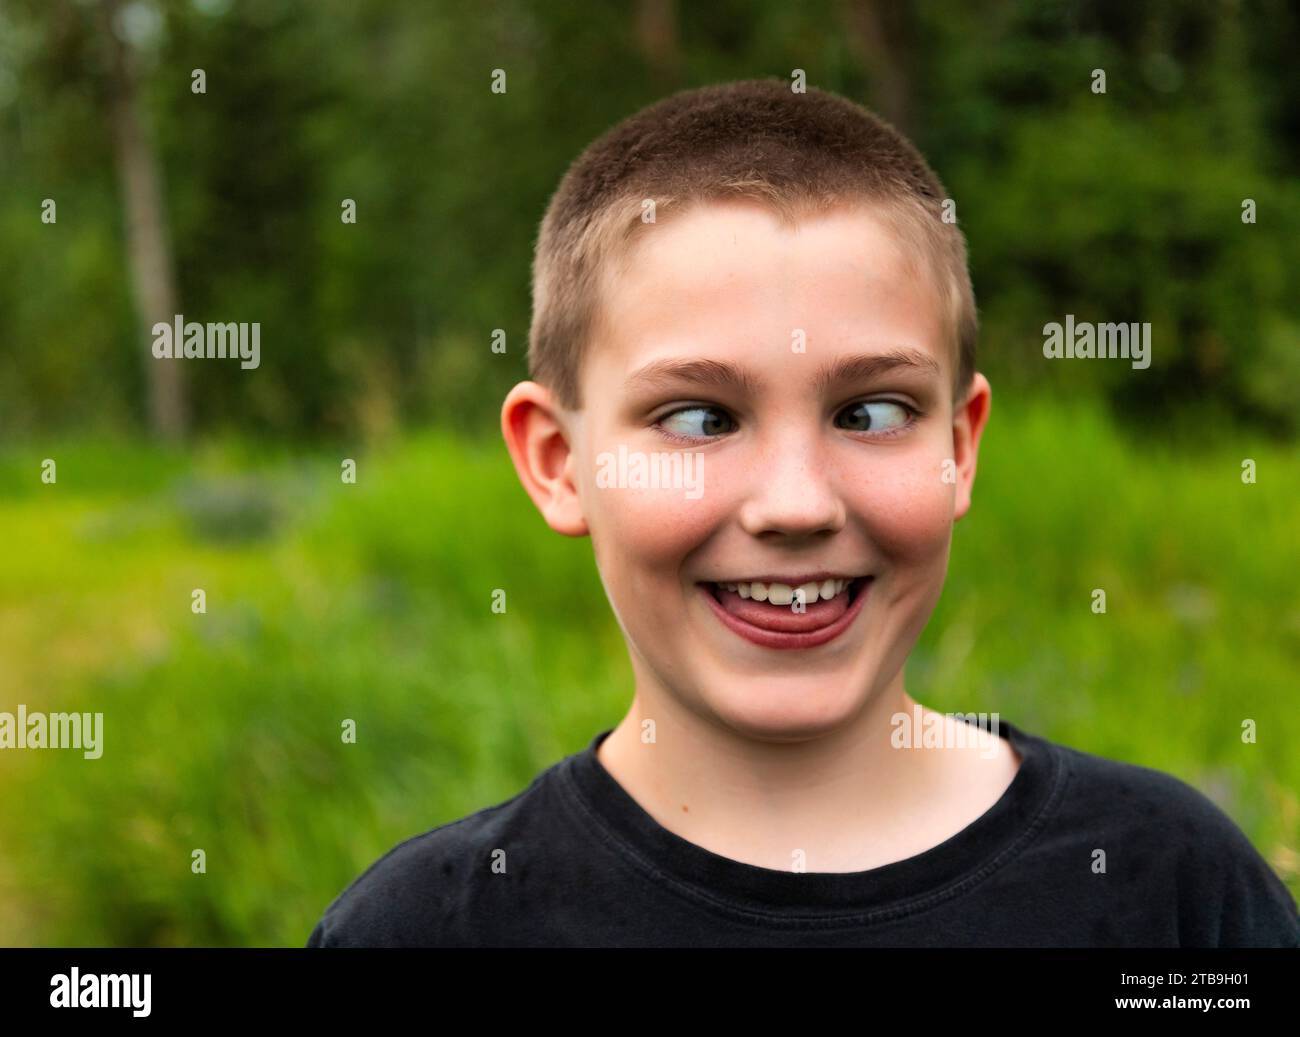 Close-up portrait of a boy crossing his eyes and making a funny face while standing in a forest; Edmonton, Alberta, Canada Stock Photo